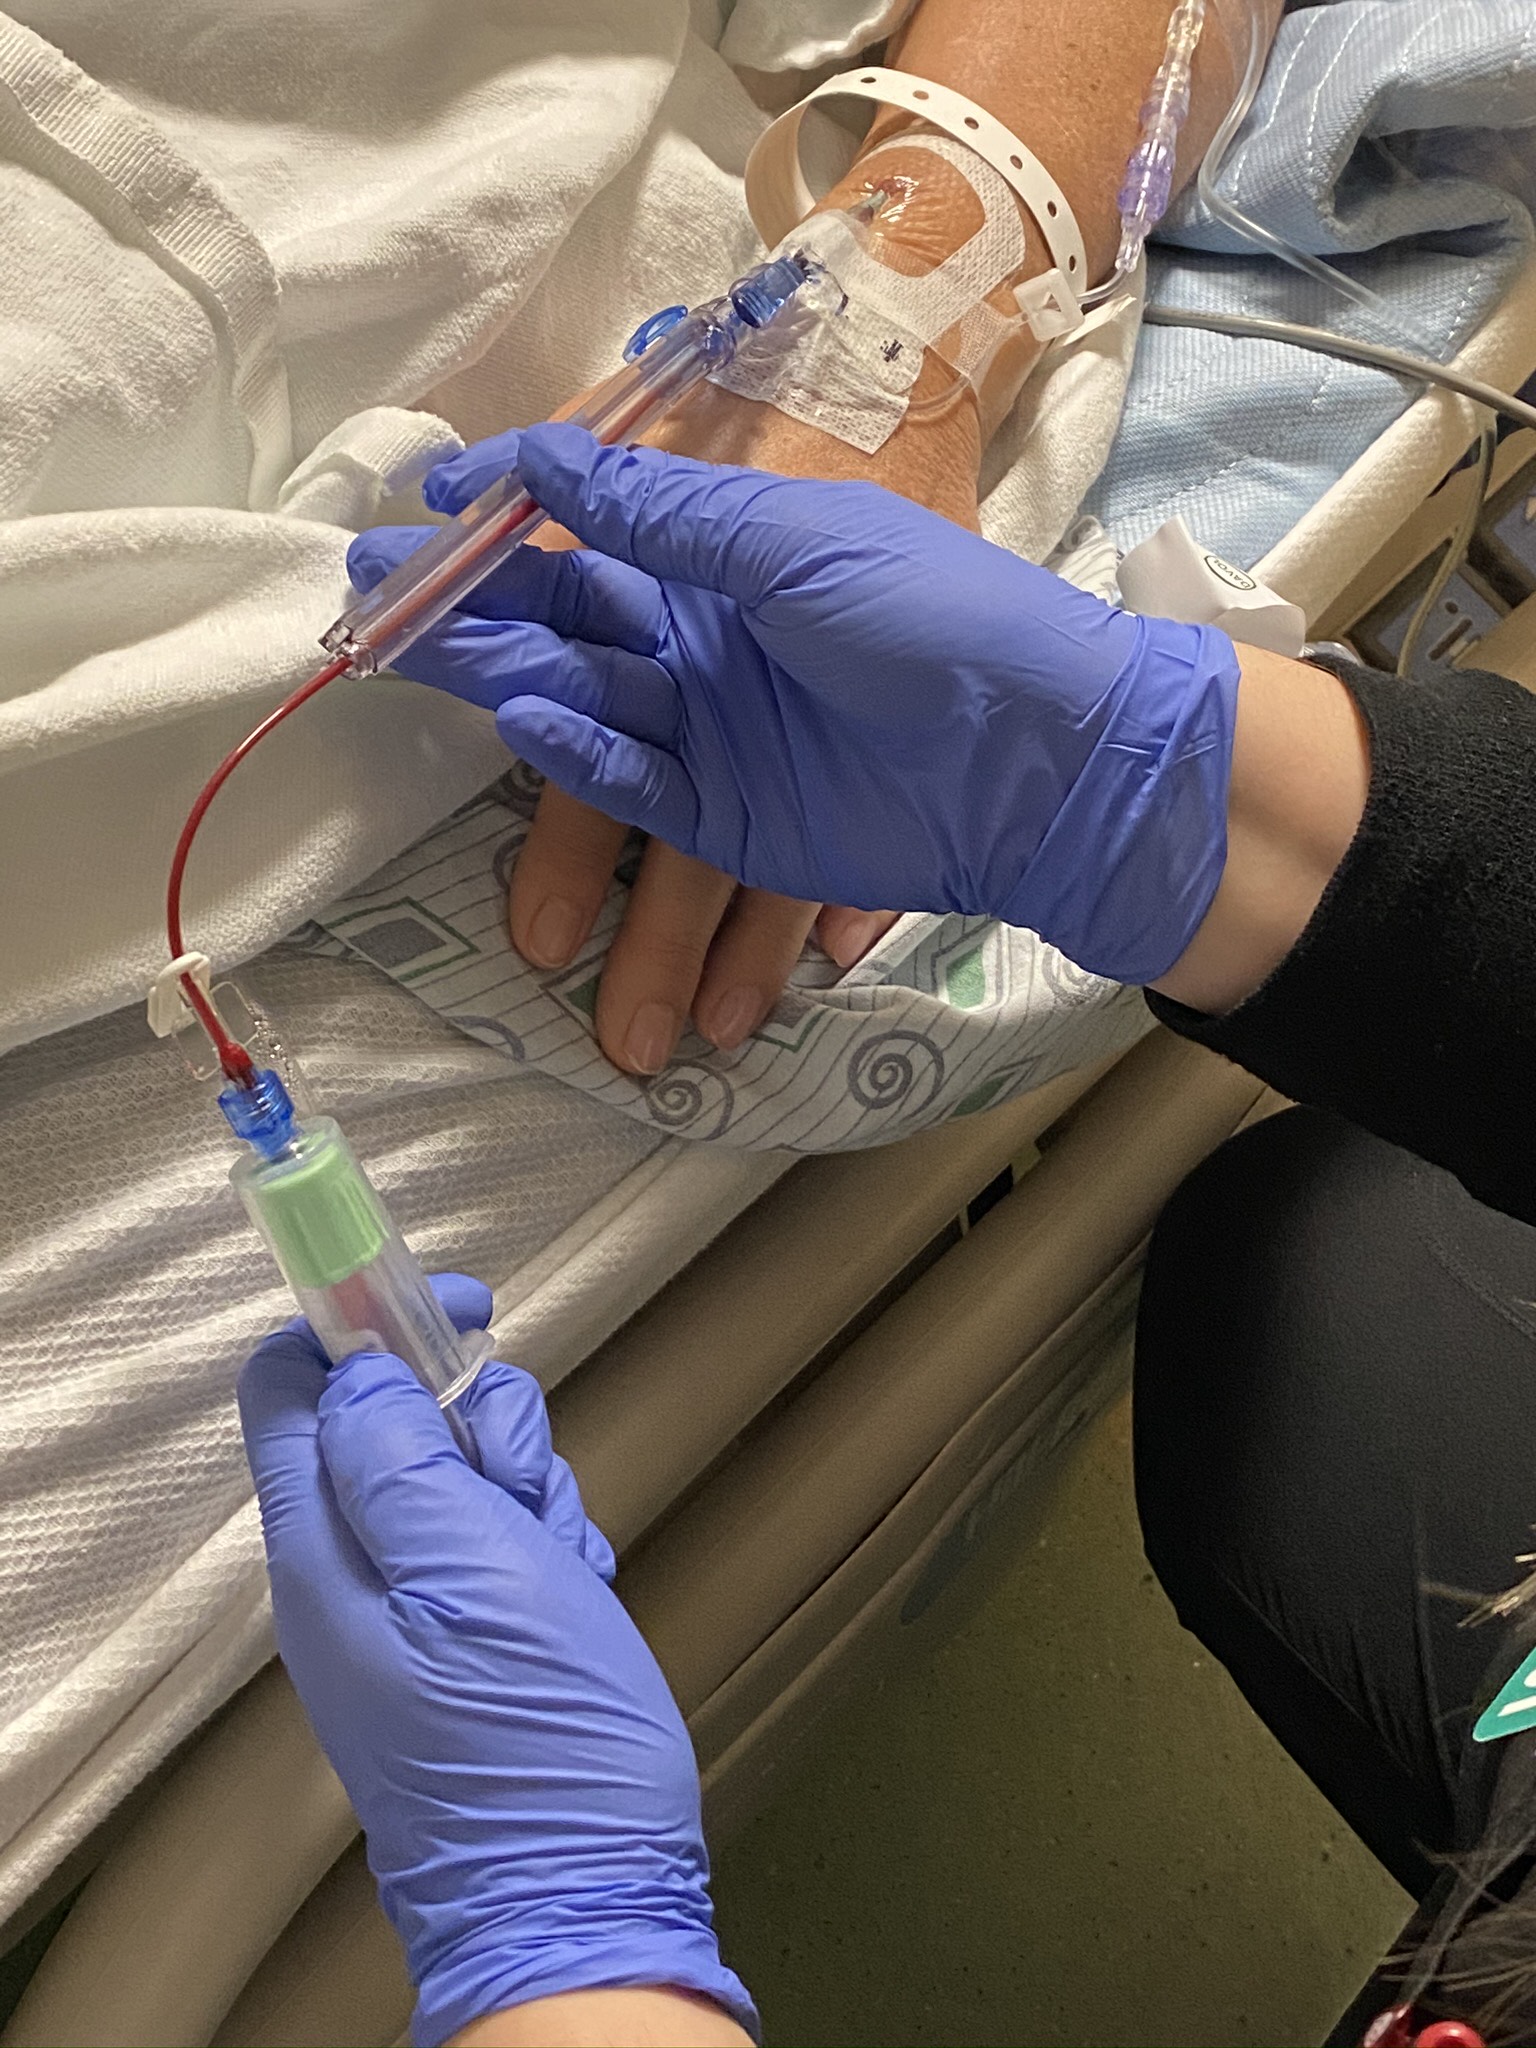 Becton, Dickinson and Company is championing the “one-stick hospital stay” via needle-free IV insertion tools.